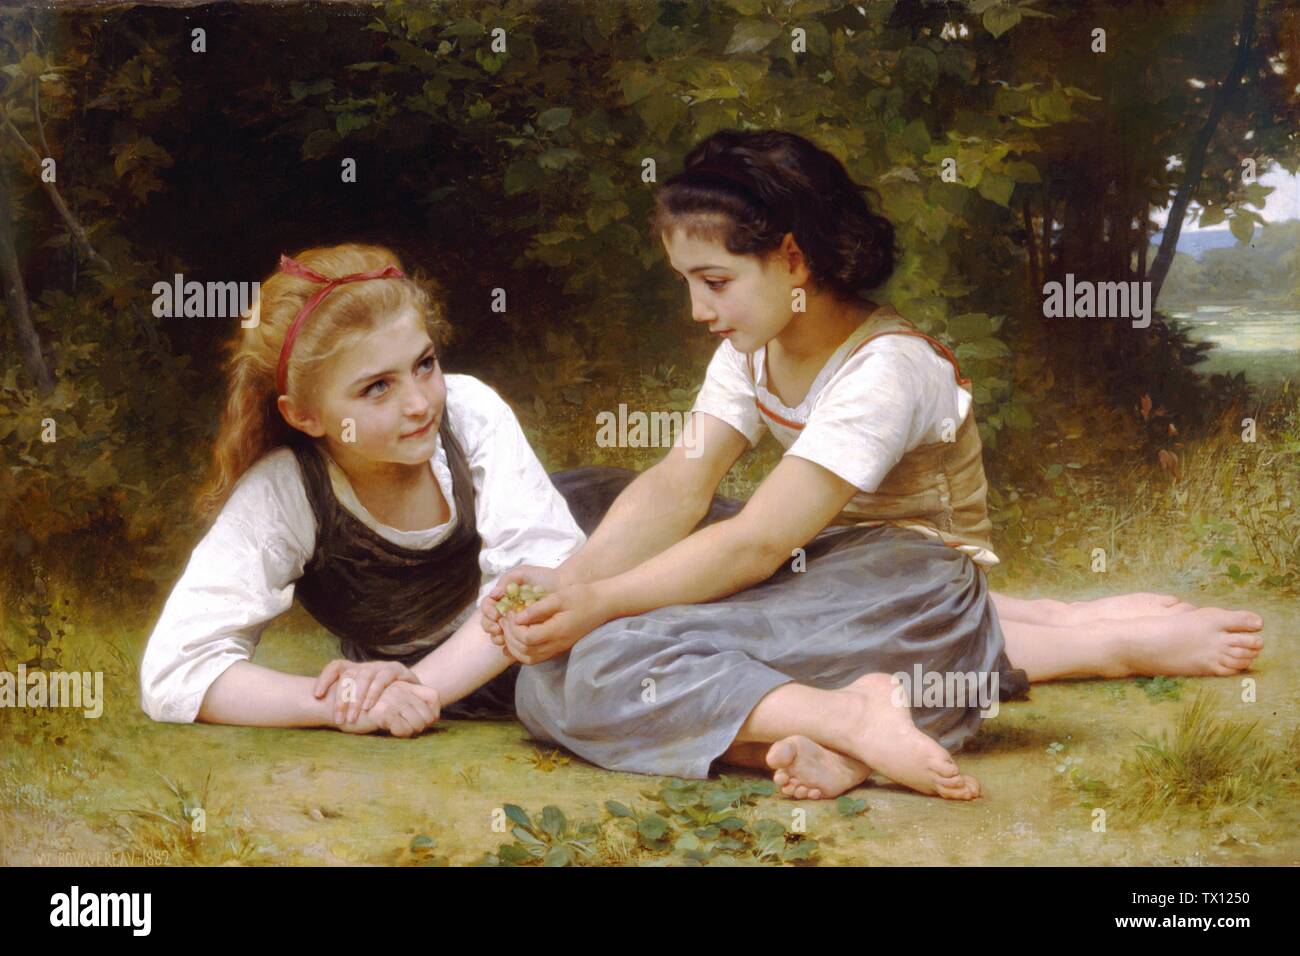 The Nut Gatherers (1882) French Academic painting by William-Adolphe Bouguereau - Very high resolution and quality image Stock Photo